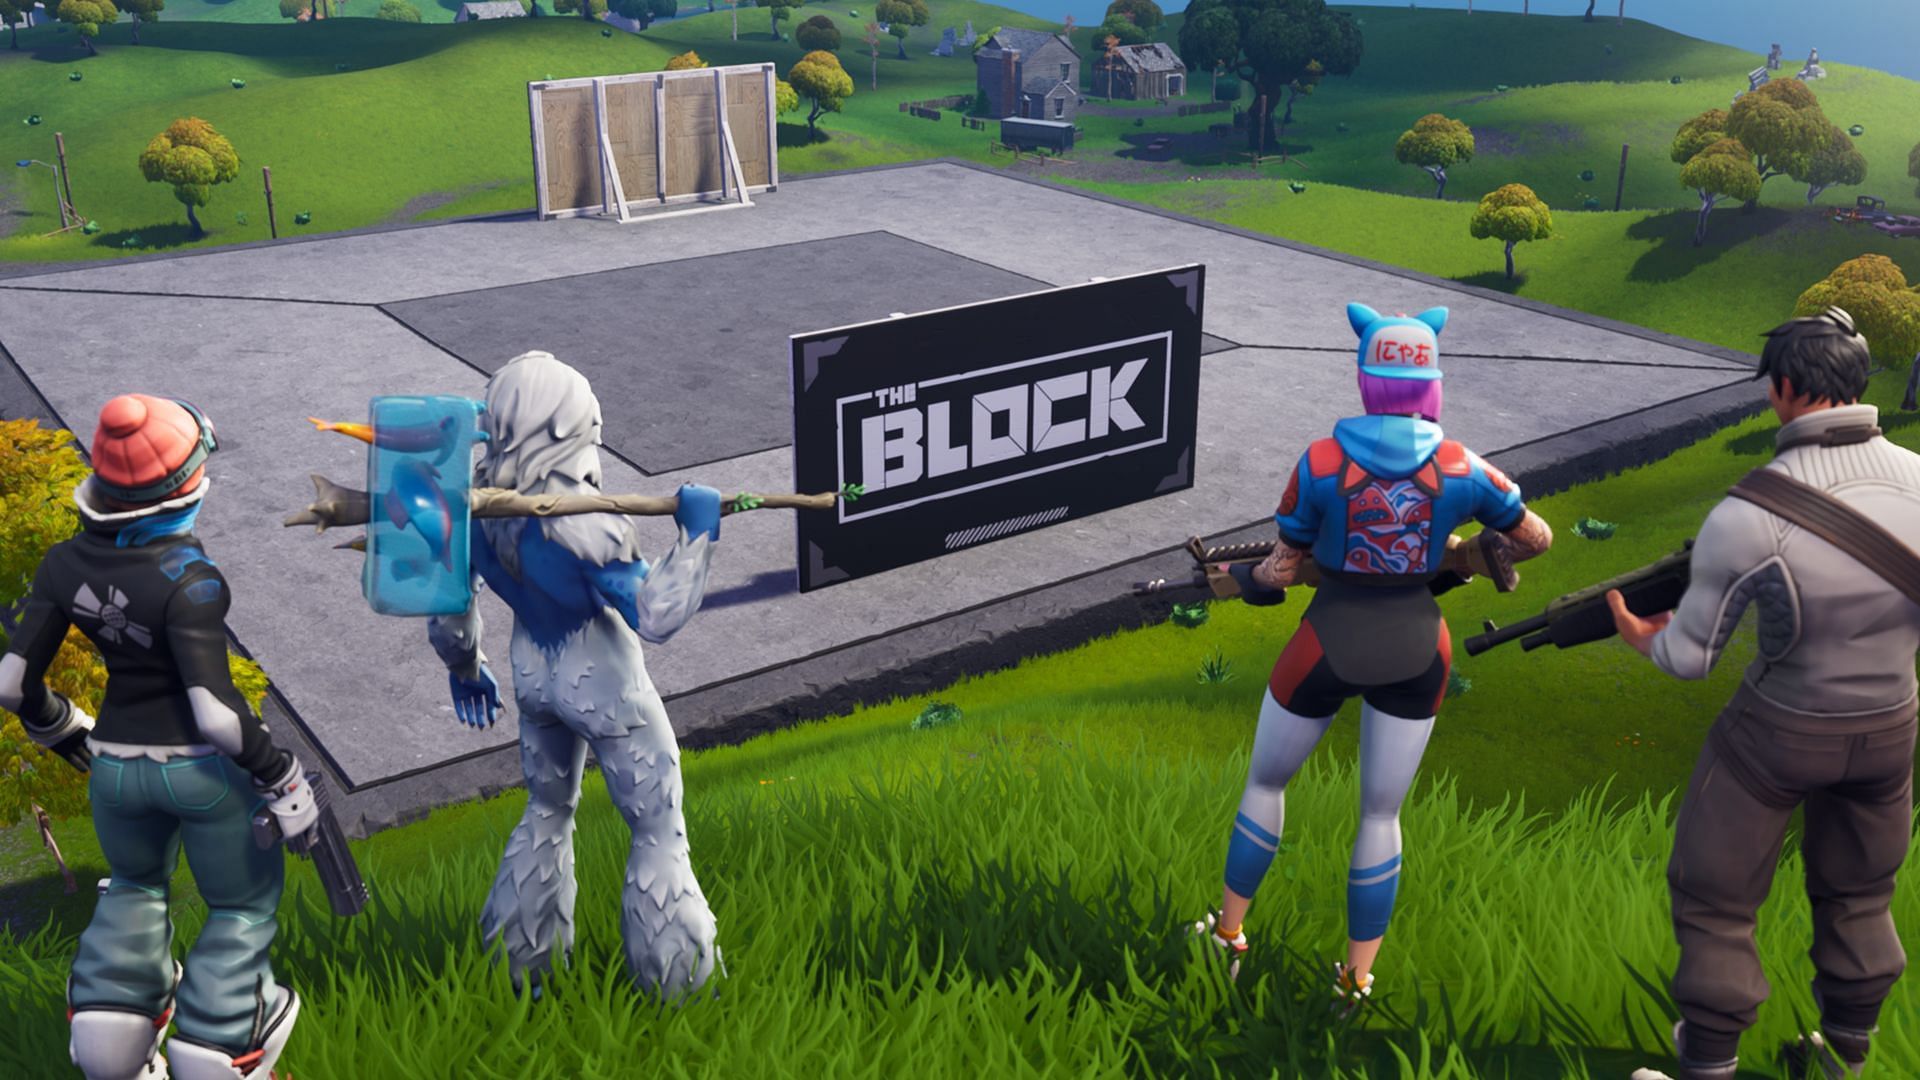 The Block is set to return to Fortnite in Chapter 3 Season 3 (Image via Epic Games)